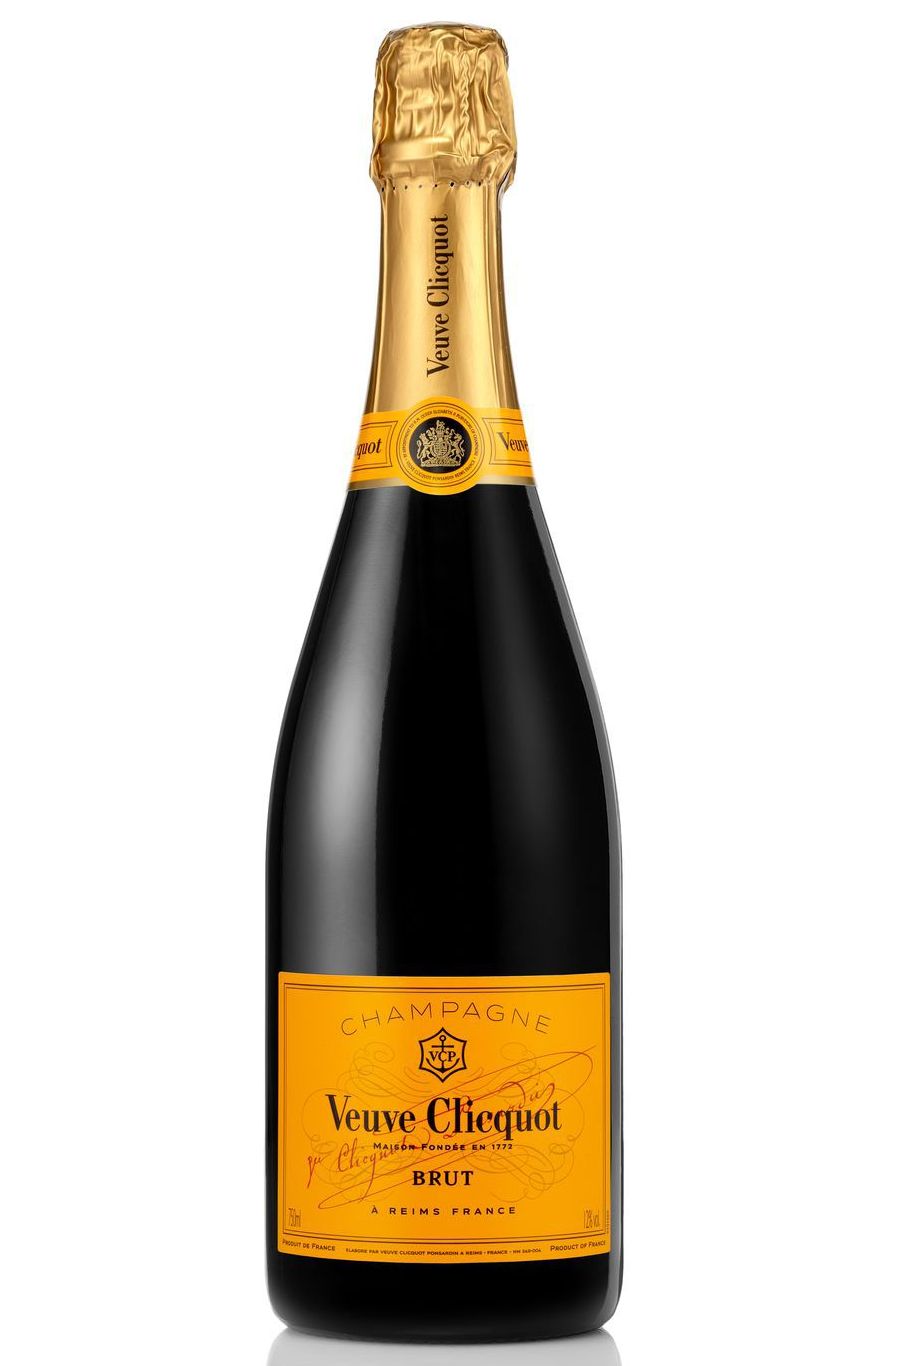 The Best Champagne for Mimosas - Champagne Bottles to Make Mimosas With